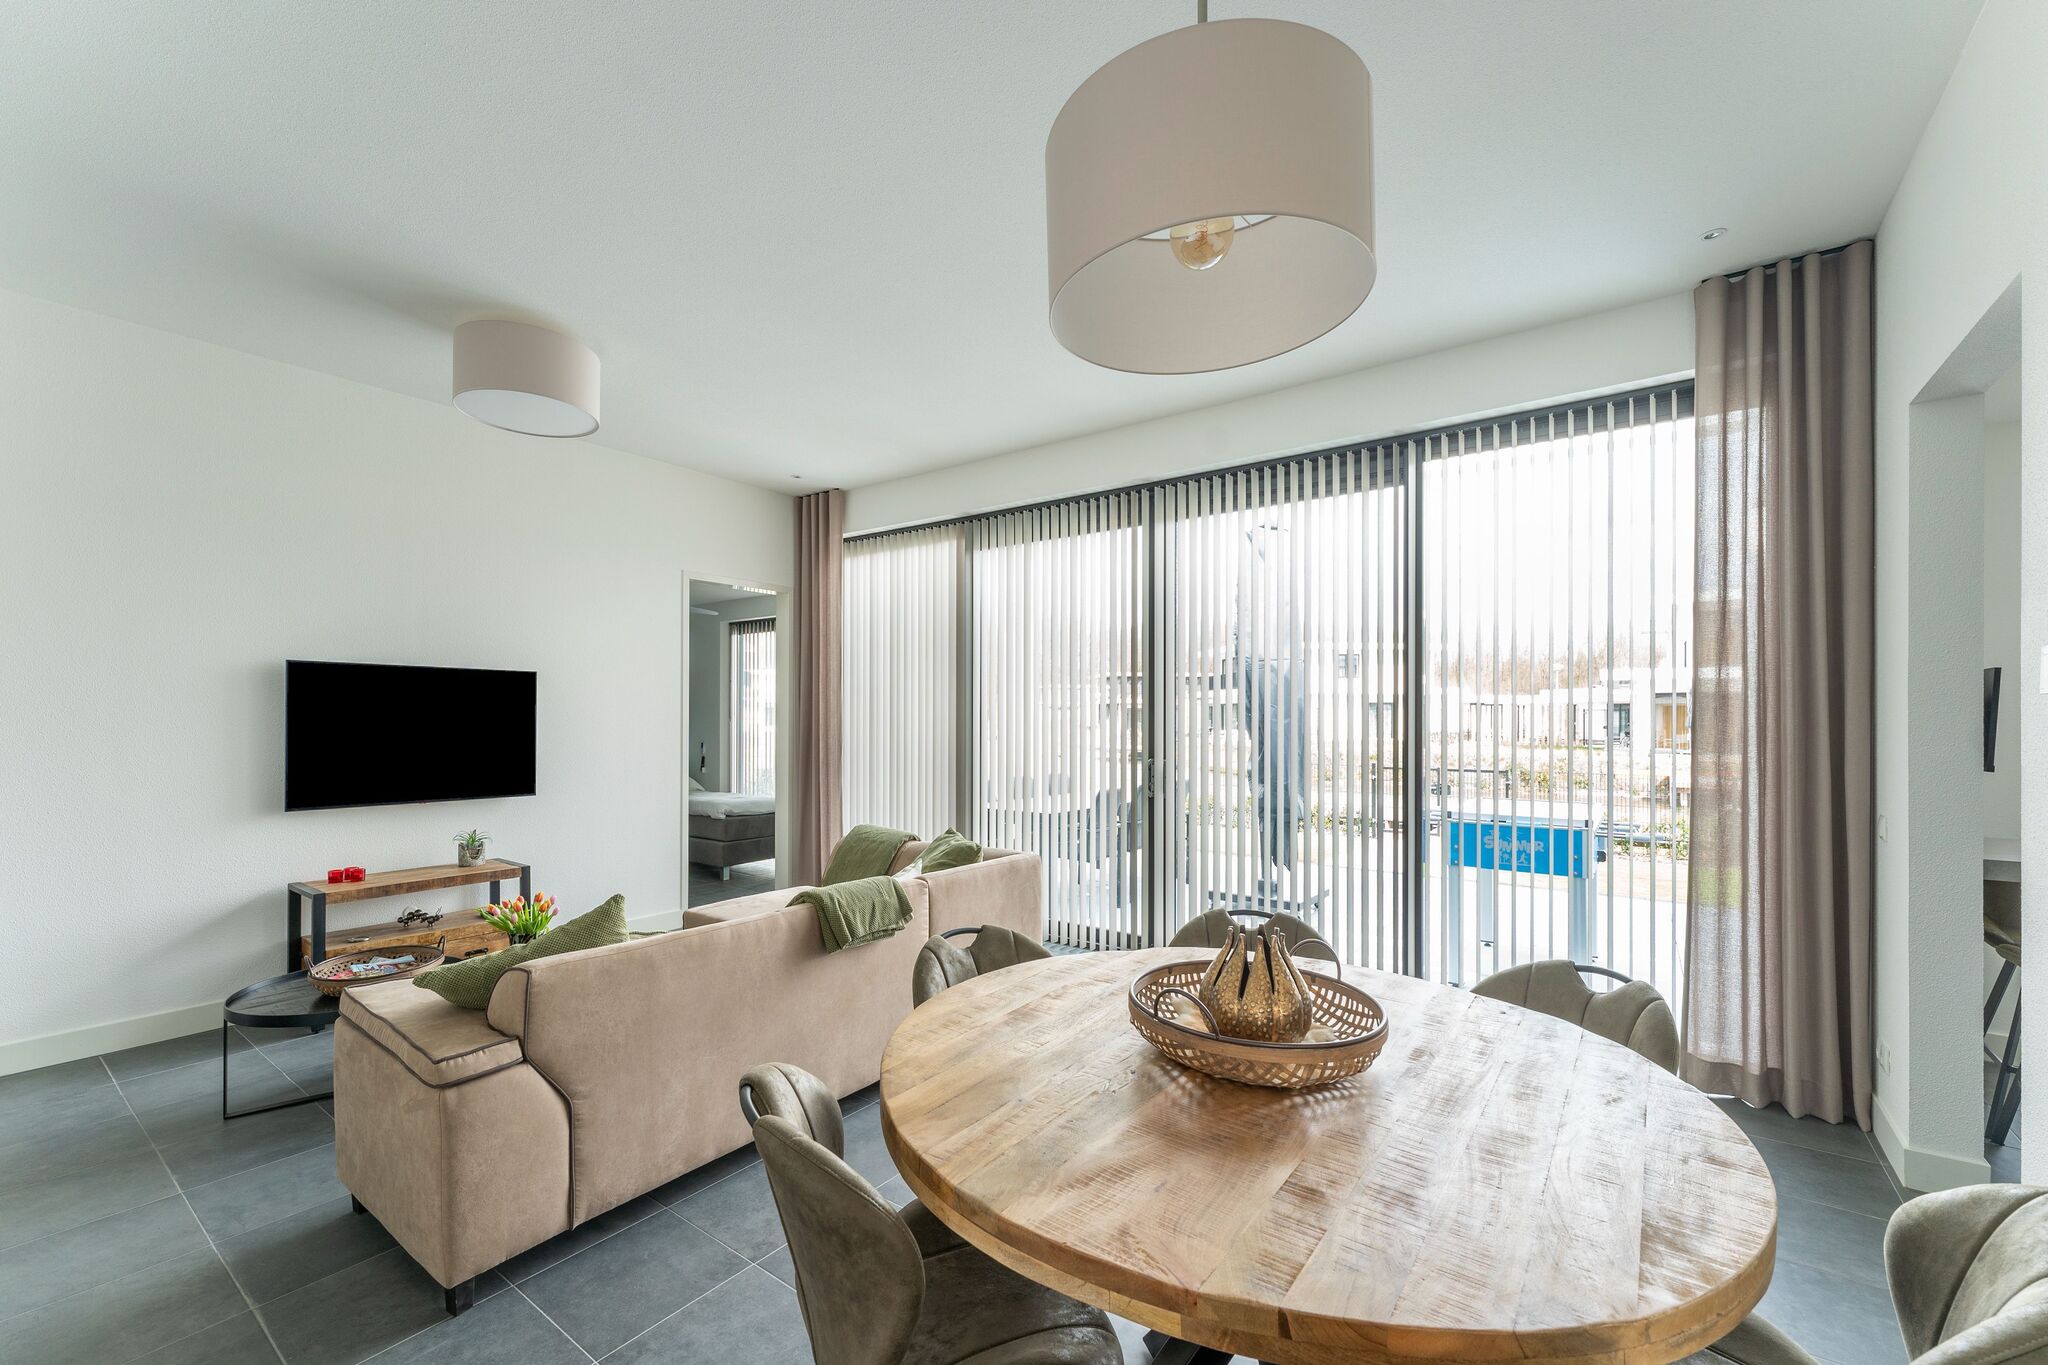 Family villa in Zeewolde at the waterfront with recreation